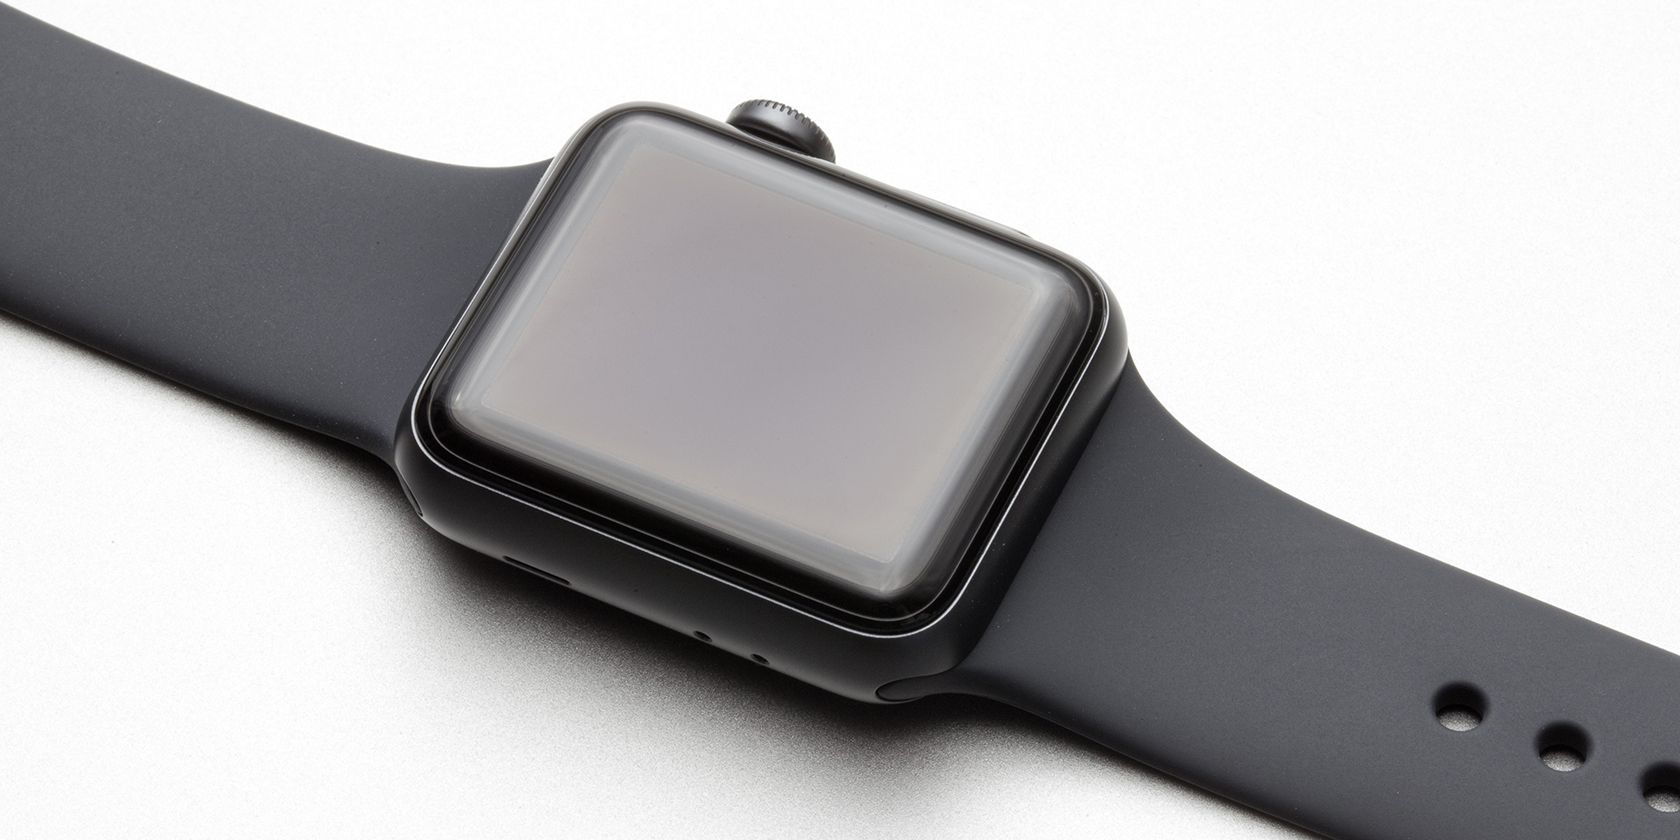 Apple Smartwatch on a white surface